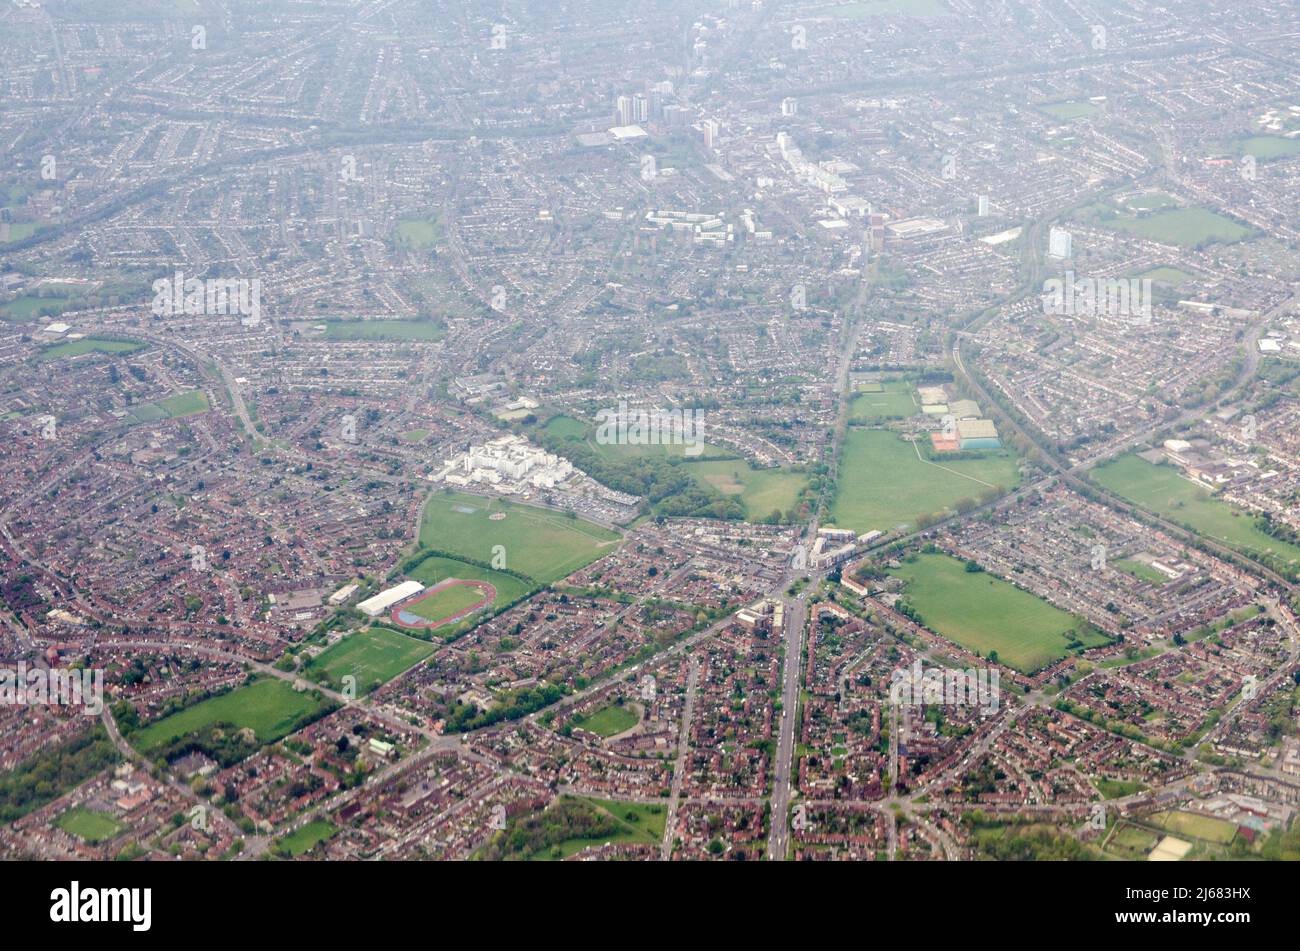 Aerial view looking South across the London Borough of Sutton with the landmark St Helier Hospital in the middle of the image surrounded by housing in Stock Photo